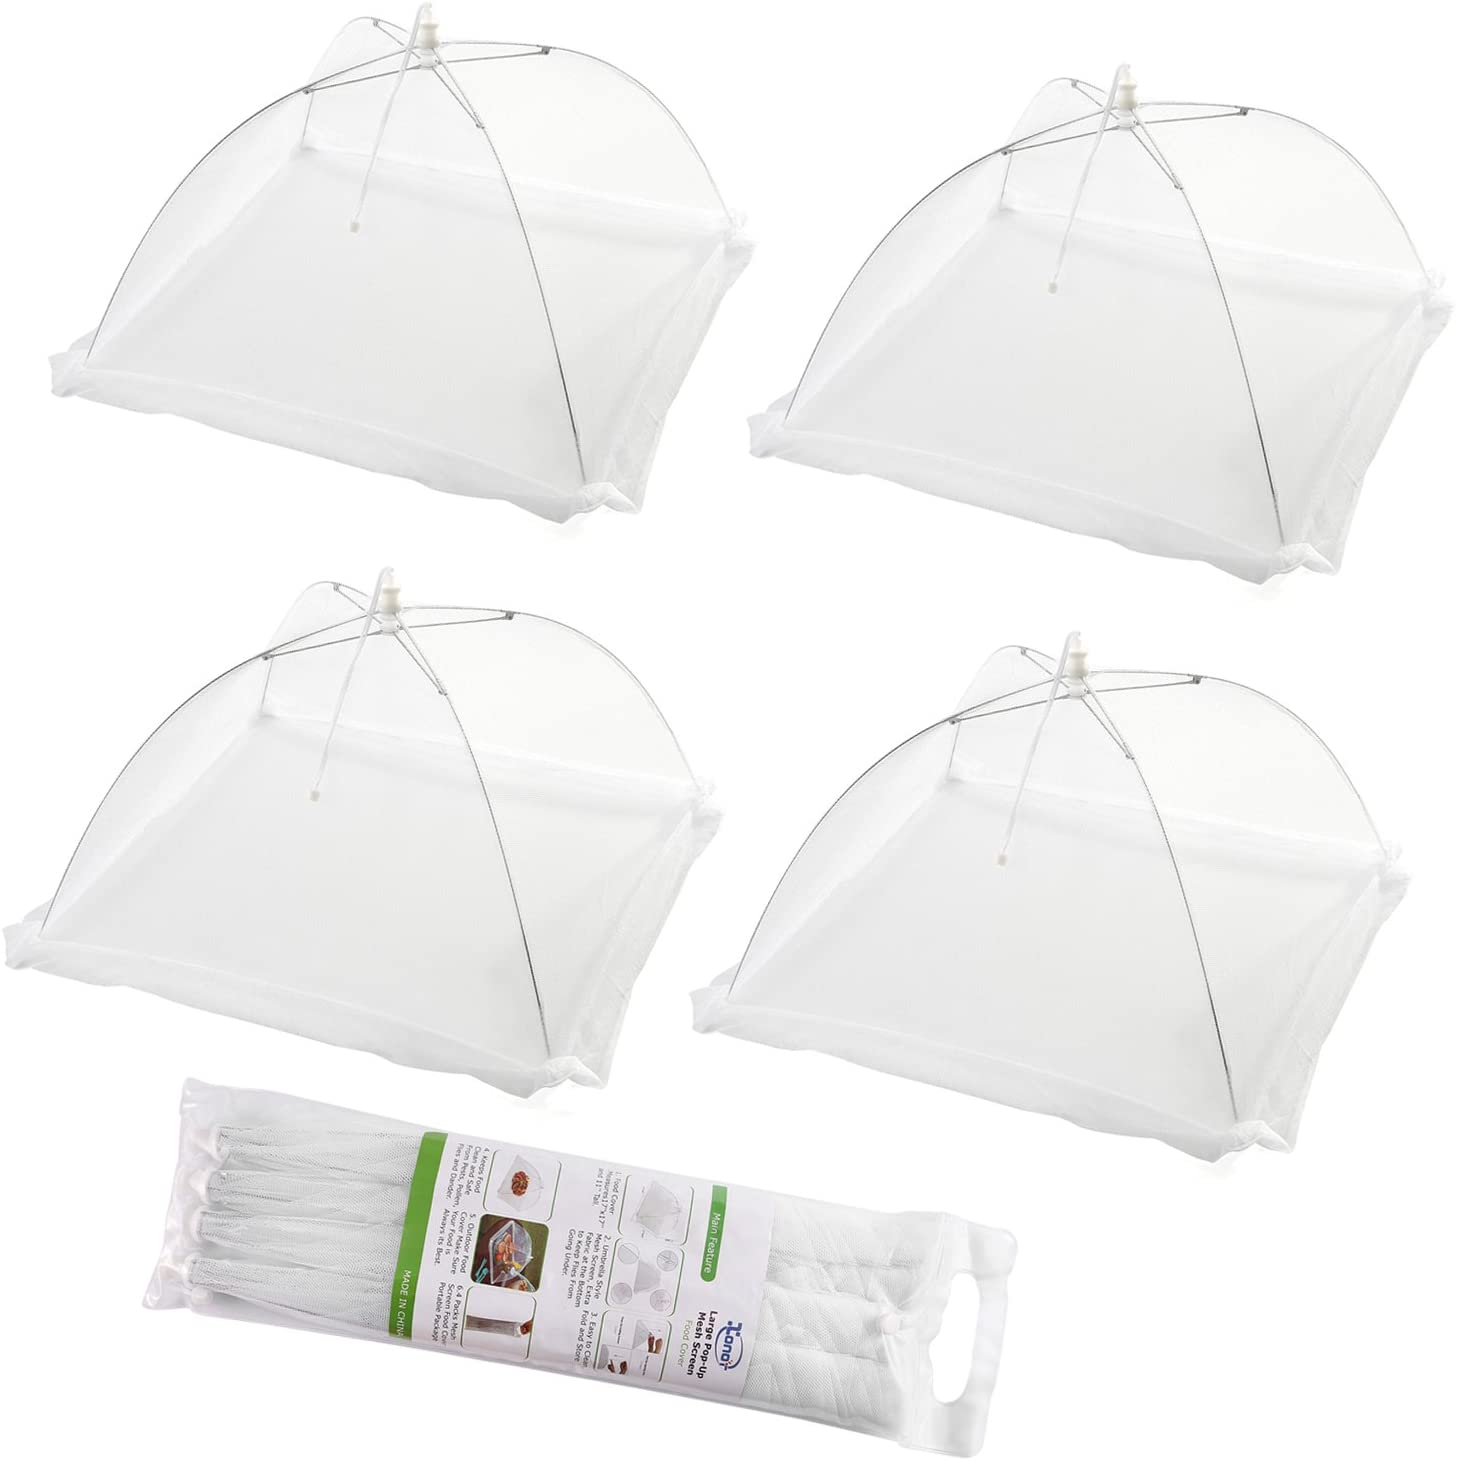 XONOR Transparent Easy Store Outdoor Food Covers, 4-Pack